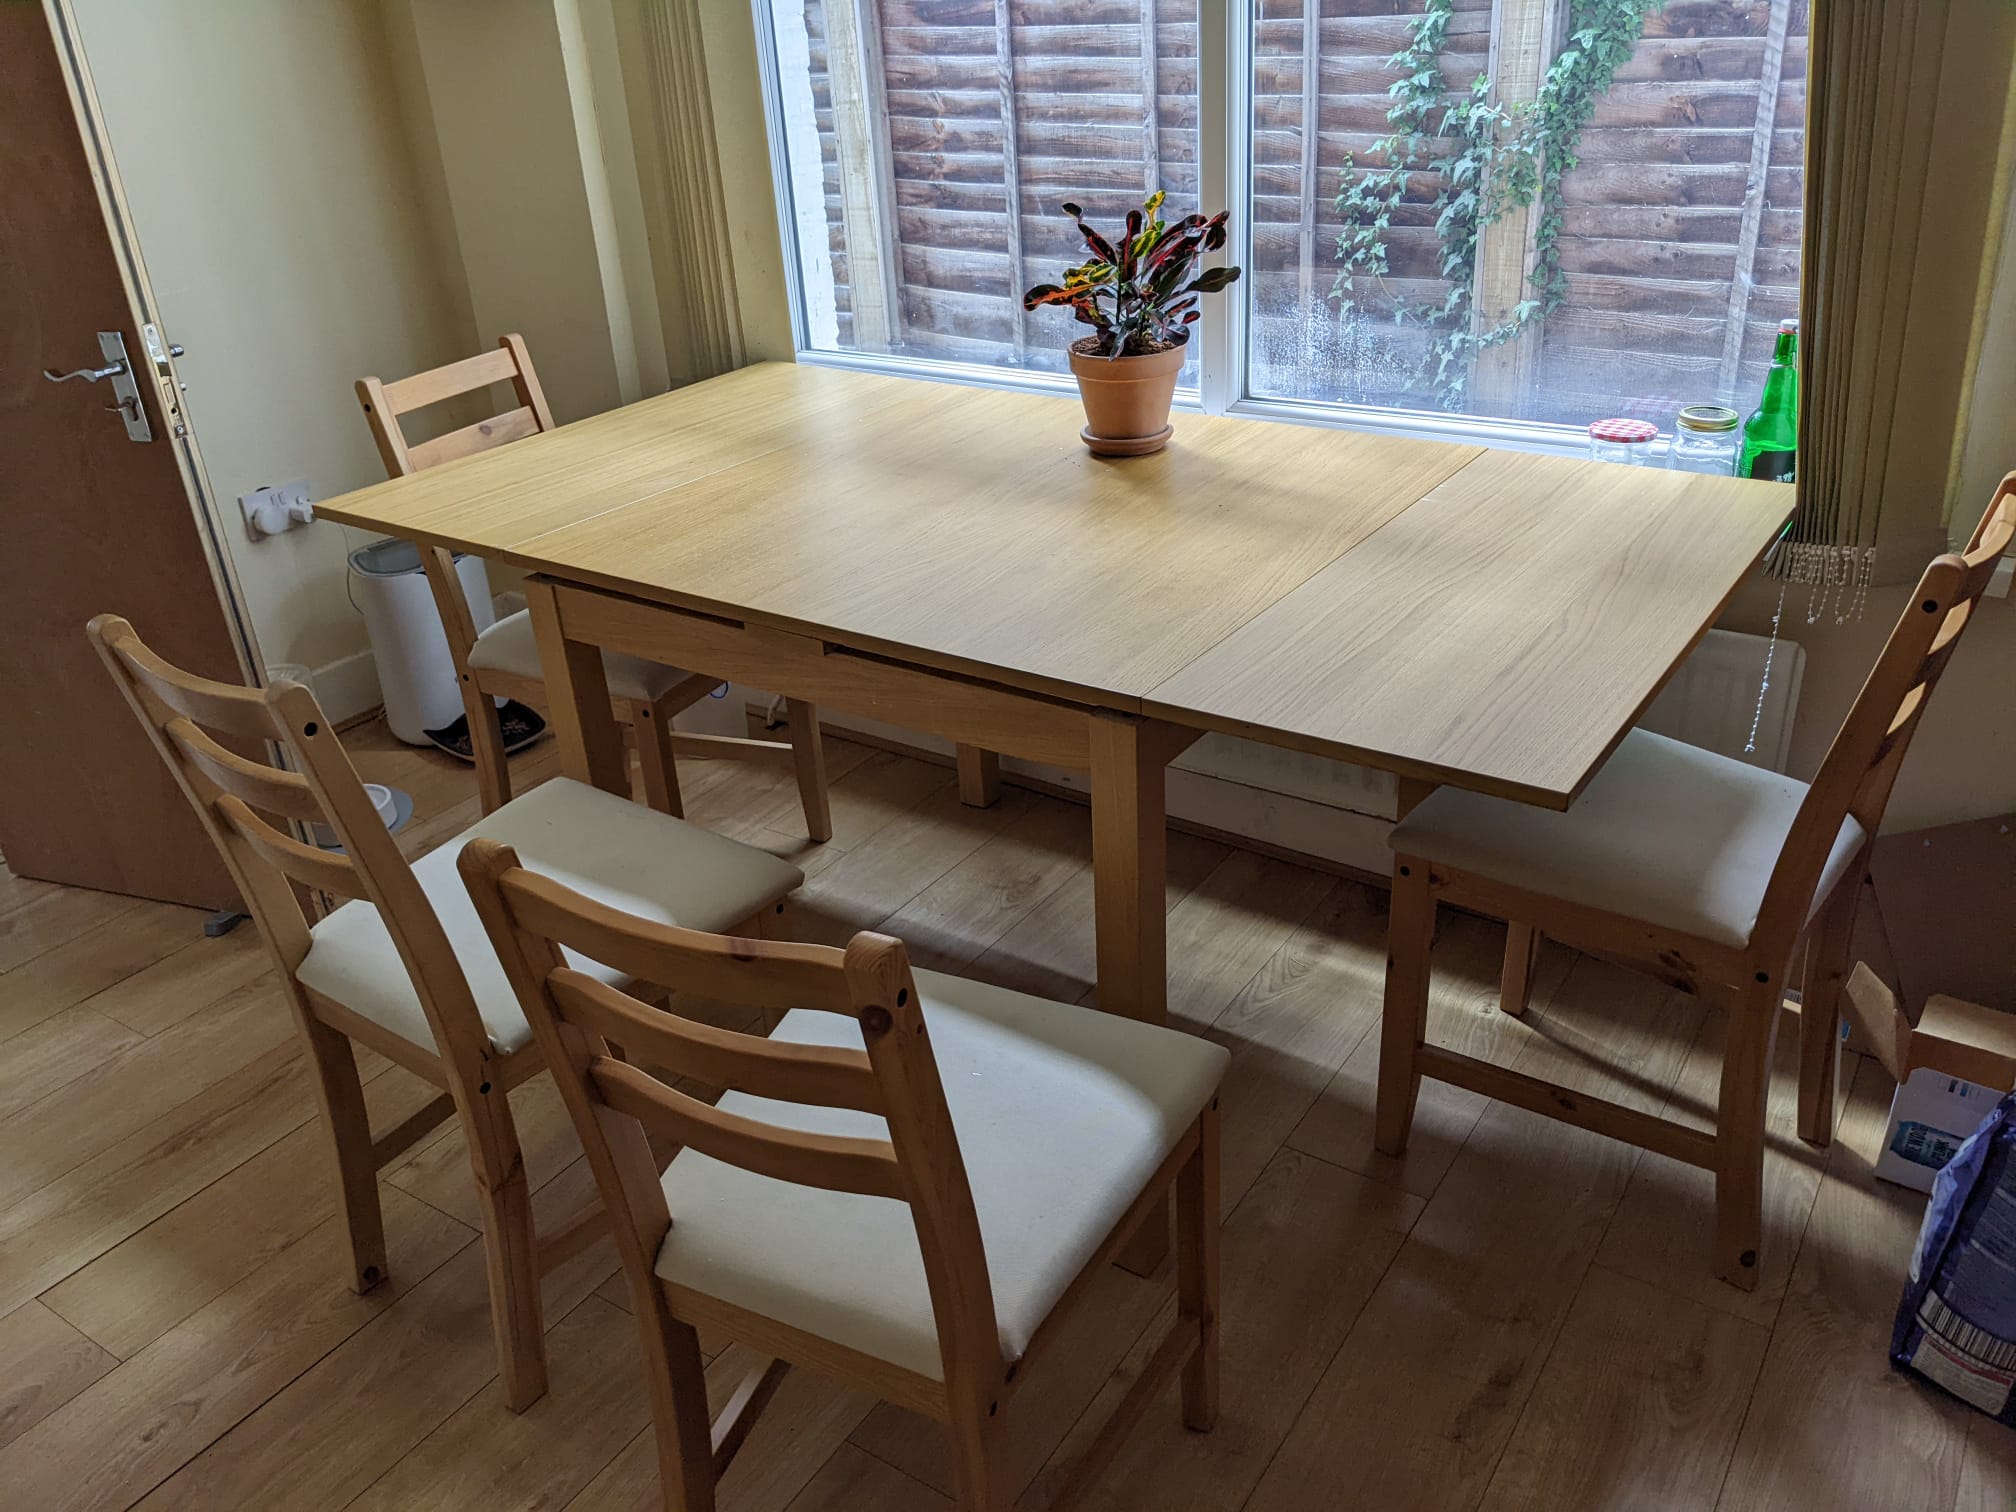 Wood dining table with leaves extending and four chairs